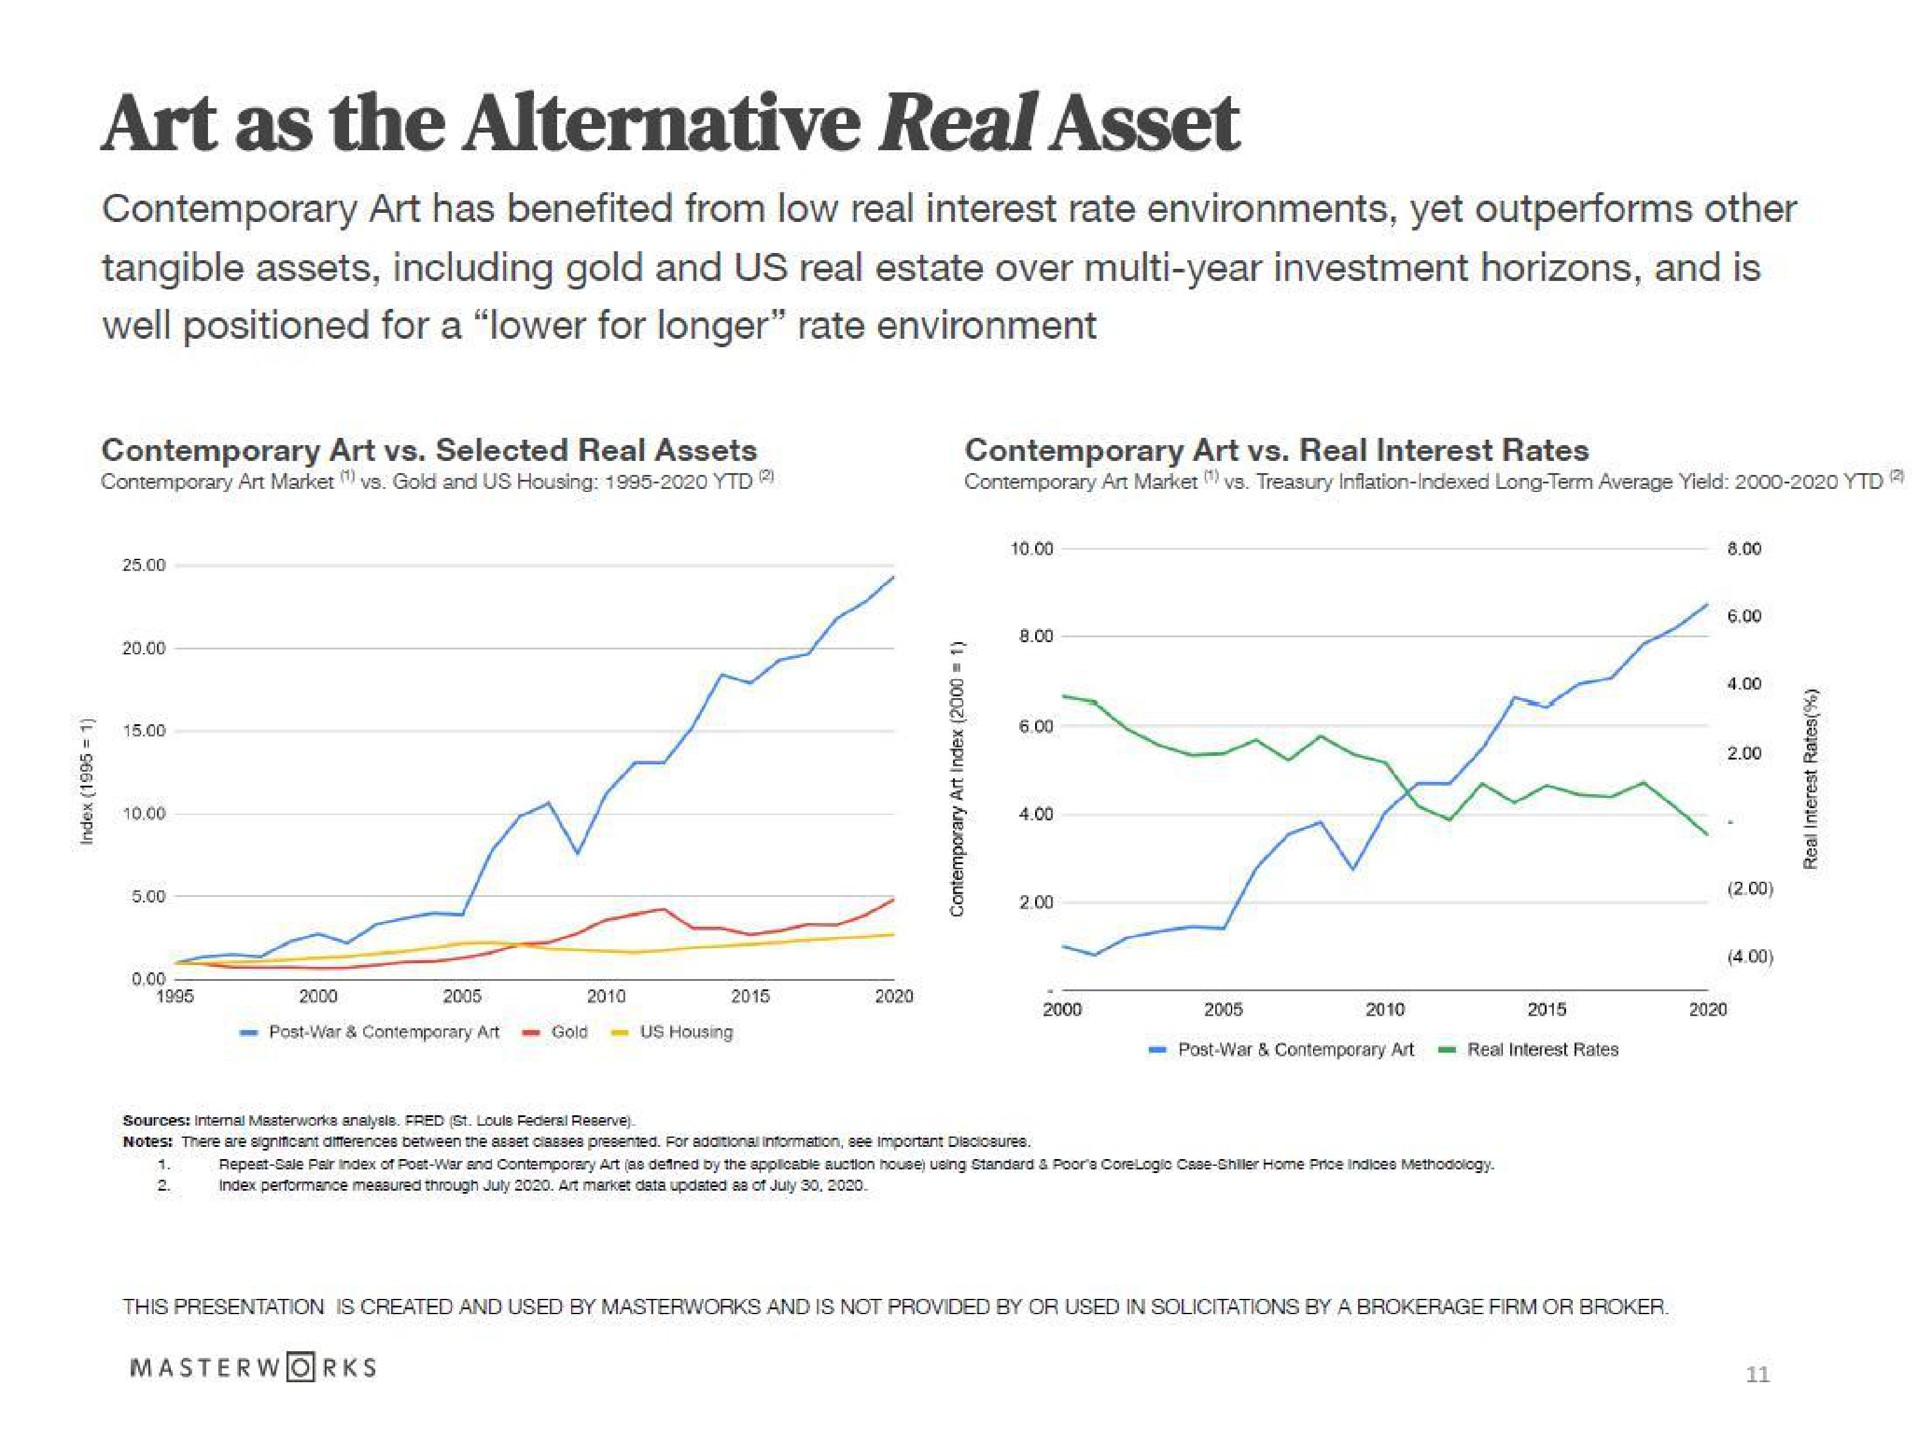 art as the alternative real asset contemporary art has benefited from low real interest rate environments yet outperforms other tangible assets including gold and us real estate over year investment horizons and is well positioned for a lower for longer rate environment i | Masterworks